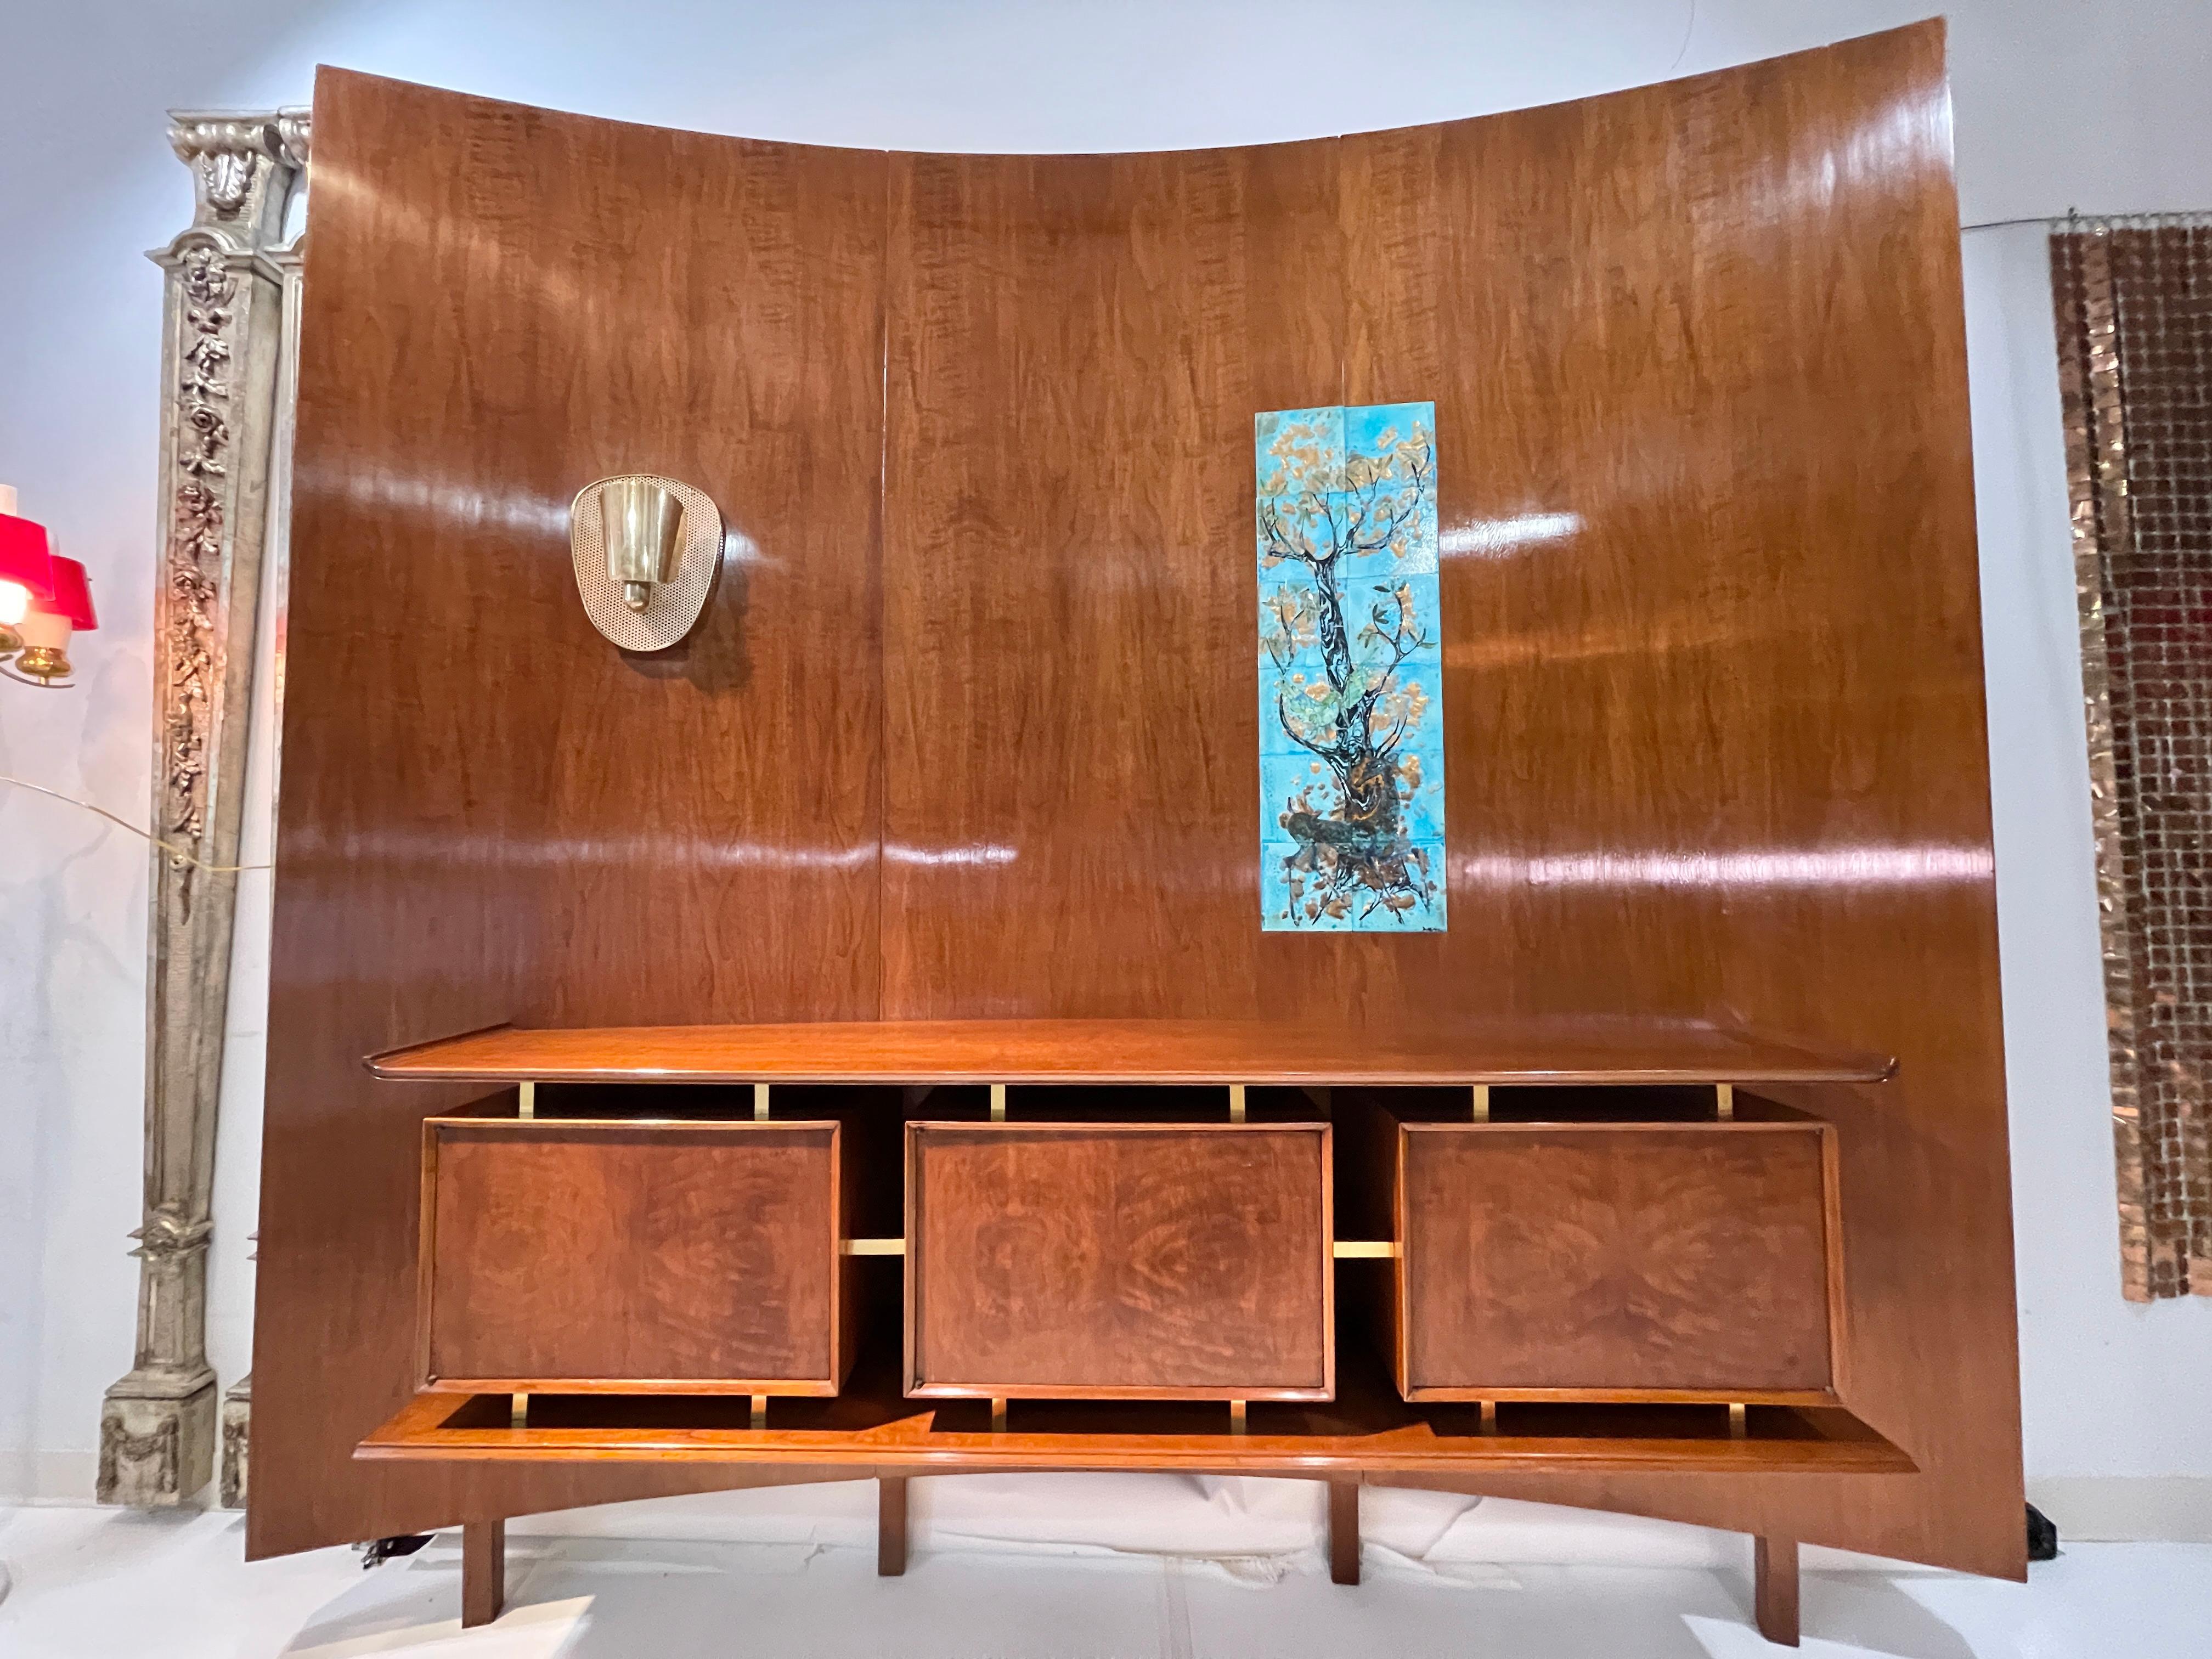 Hans Weiss (1900 to ?) and William Basser (1900 to 1958) of Weiss & Basser interior designers, New York, NY curved walnut wall unit mounted with floating sideboard consisting of three cabinets apparently supported by brass standoffs between an upper